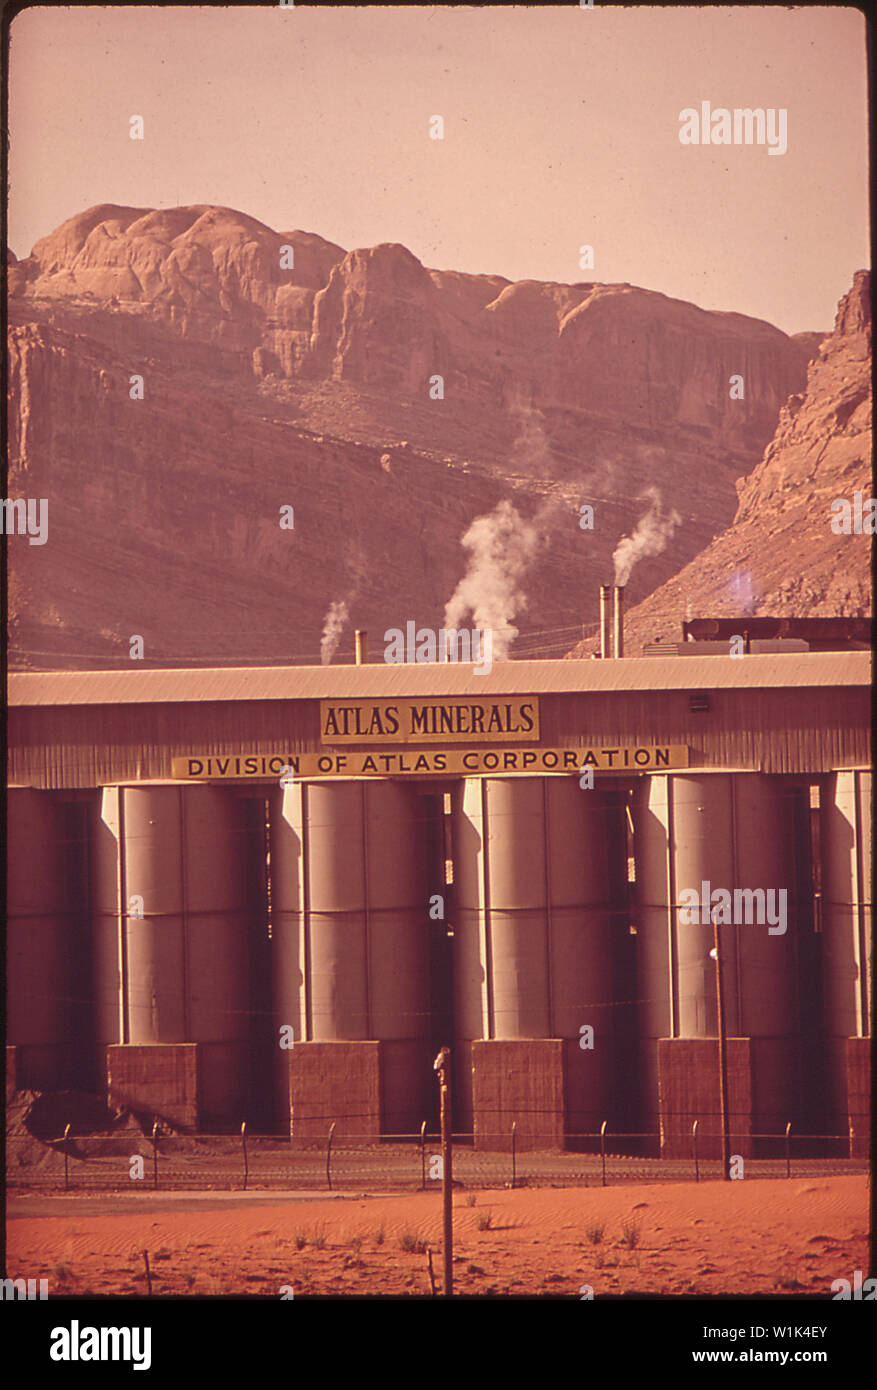 URANIUM MILL JUST OUTSIDE OF MOAB. THE ORE COMES FROM A MINE ABOUT 25 MILES AWAY. THE REGION IS RICH IN URANIUM AND POTASH. THESE MINERALS ARE THE BASIS OF THE TWO MAJOR INDUSTRIES OF THE AREA Stock Photo